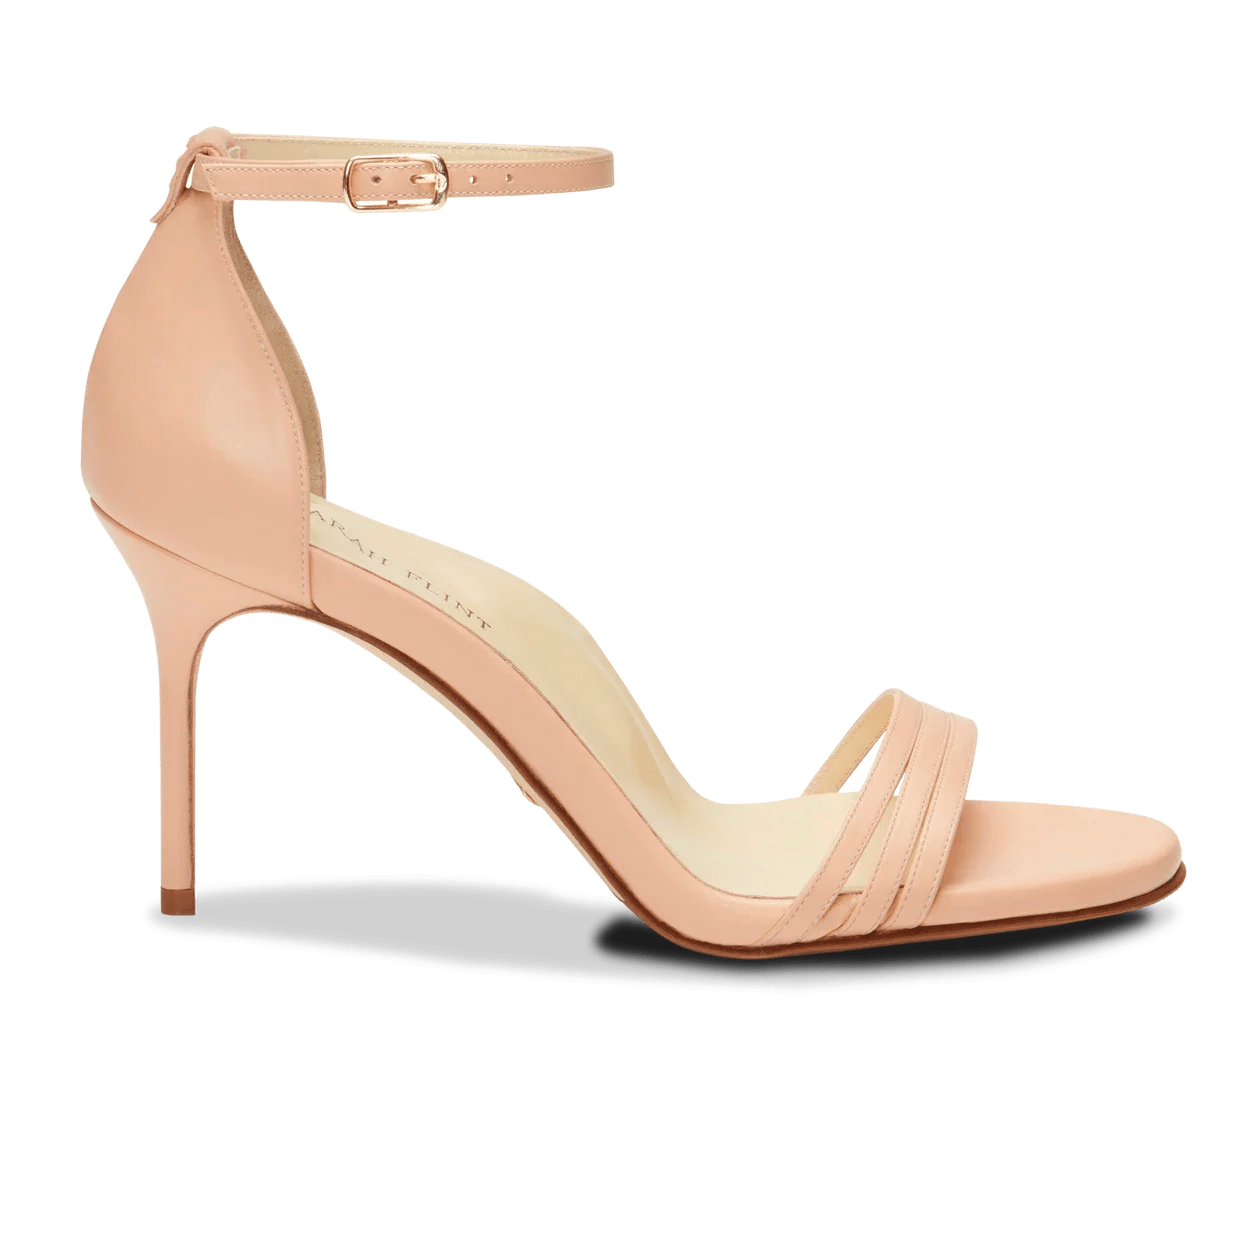 Sarah Flint Perfect Sandal 85, heels with arch support